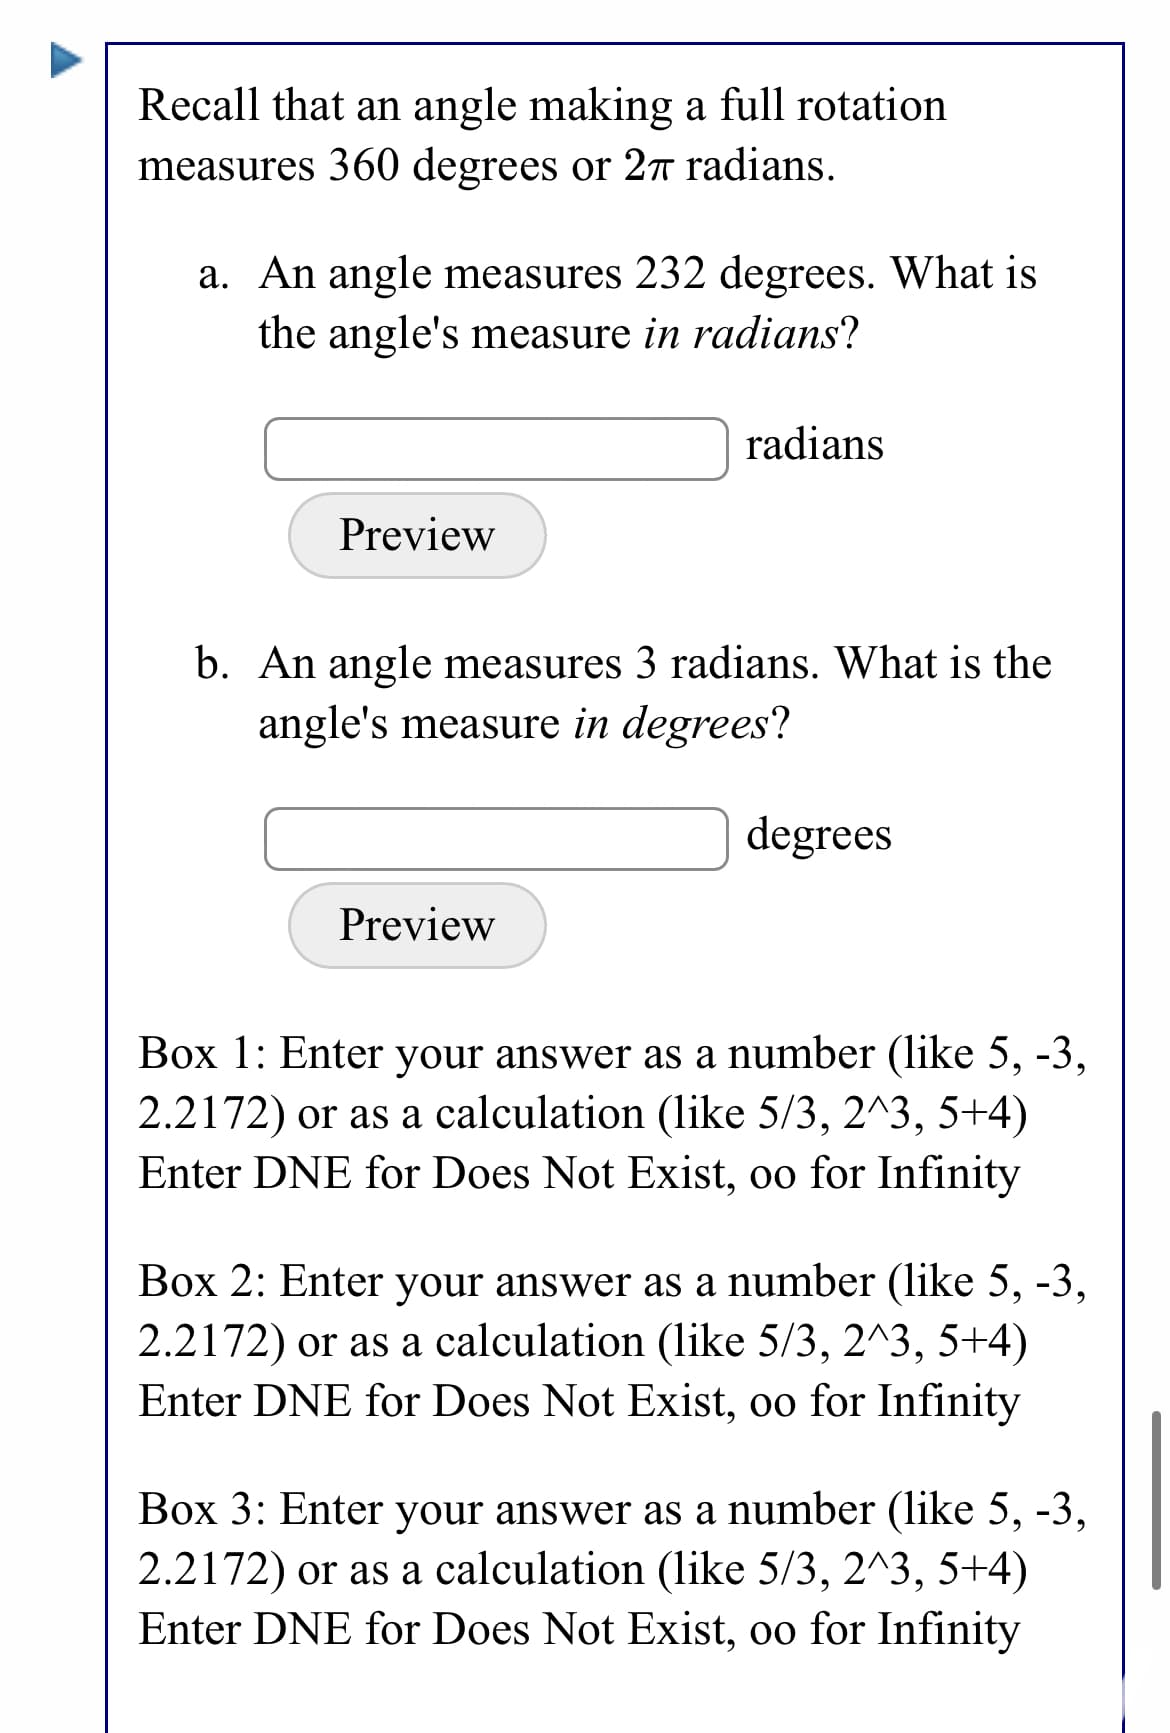 Recall that an angle making a full rotation
measures 360 degrees or 2r radians.
a. An angle measures 232 degrees. What is
the angle's measure in radians?
radians
Preview
b. An angle measures 3 radians. What is the
angle's measure in degrees?
degrees
Preview
Box 1: Enter your answer as a number (like 5, -3,
2.2172) or as a calculation (like 5/3, 2^3, 5+4)
Enter DNE for Does Not Exist, oo for Infinity
Box 2: Enter your answer as a number (like 5, -3,
2.2172) or as a calculation (like 5/3, 2^3, 5+4)
Enter DNE for Does Not Exist, oo for Infinity
Box 3: Enter your answer as a number (like 5, -3,
2.2172) or as a calculation (like 5/3, 2^3, 5+4)
Enter DNE for Does Not Exist, oo for Infinity
